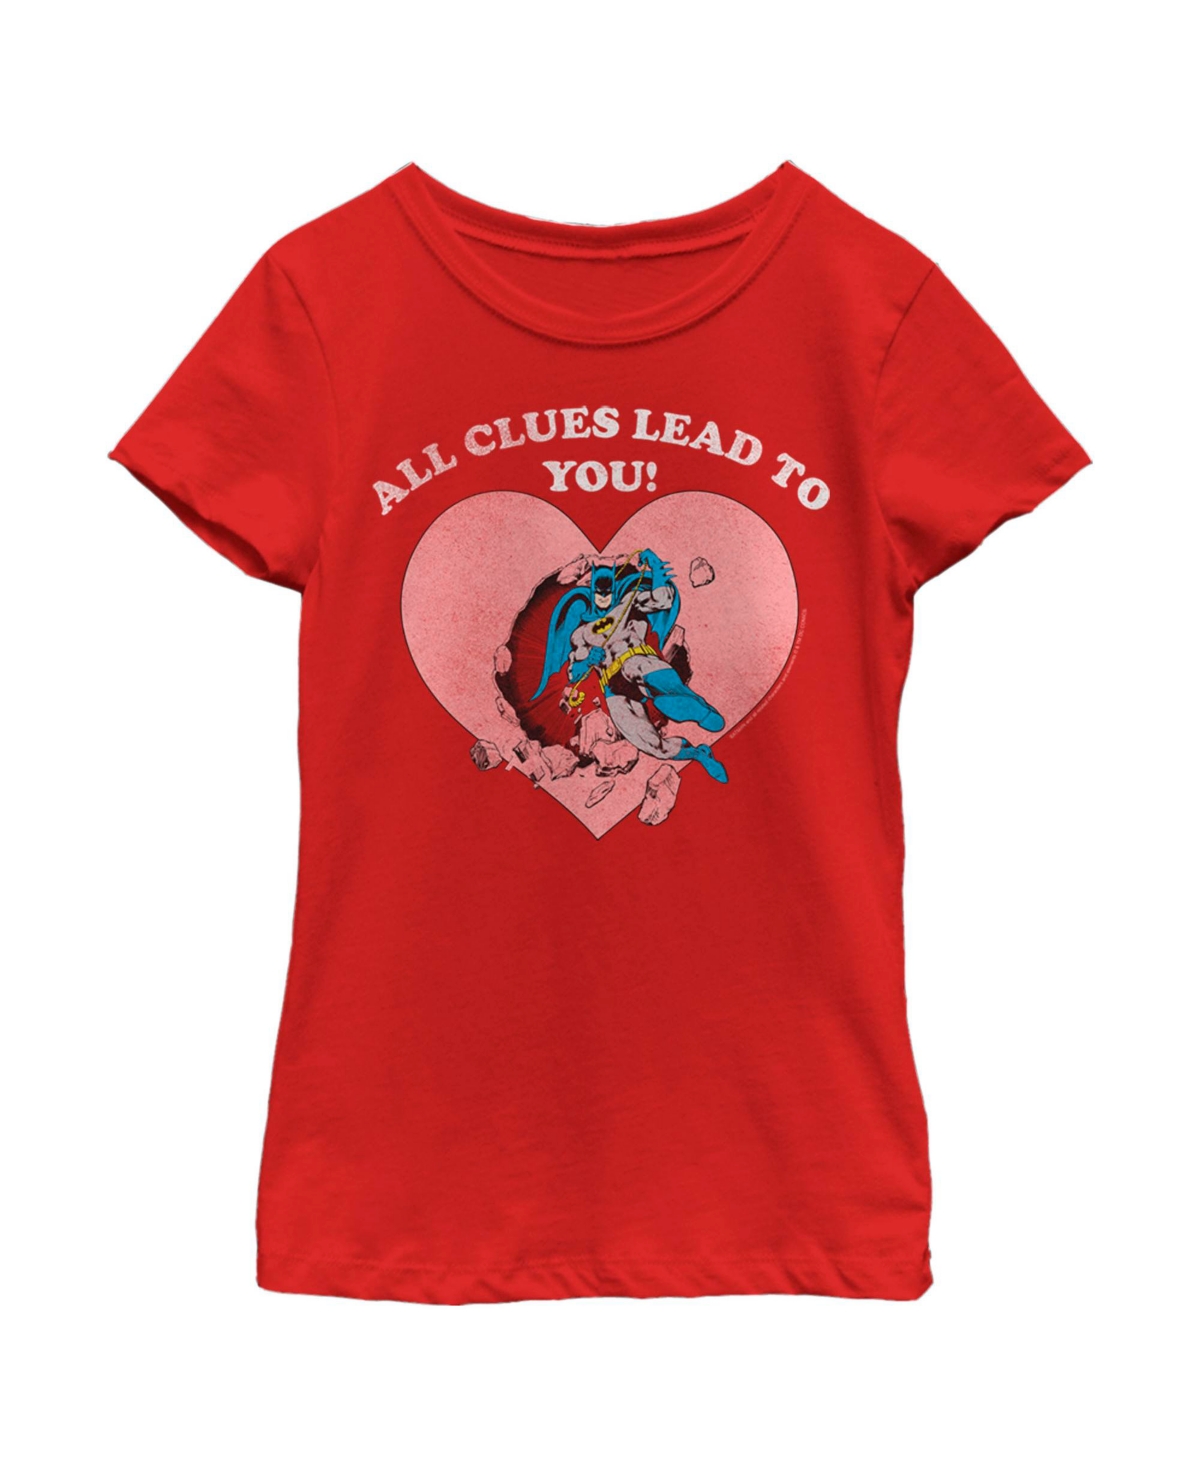 DC COMICS GIRL'S BATMAN VALENTINE'S DAY ALL THE CLUES LEAD TO YOU CHILD T-SHIRT